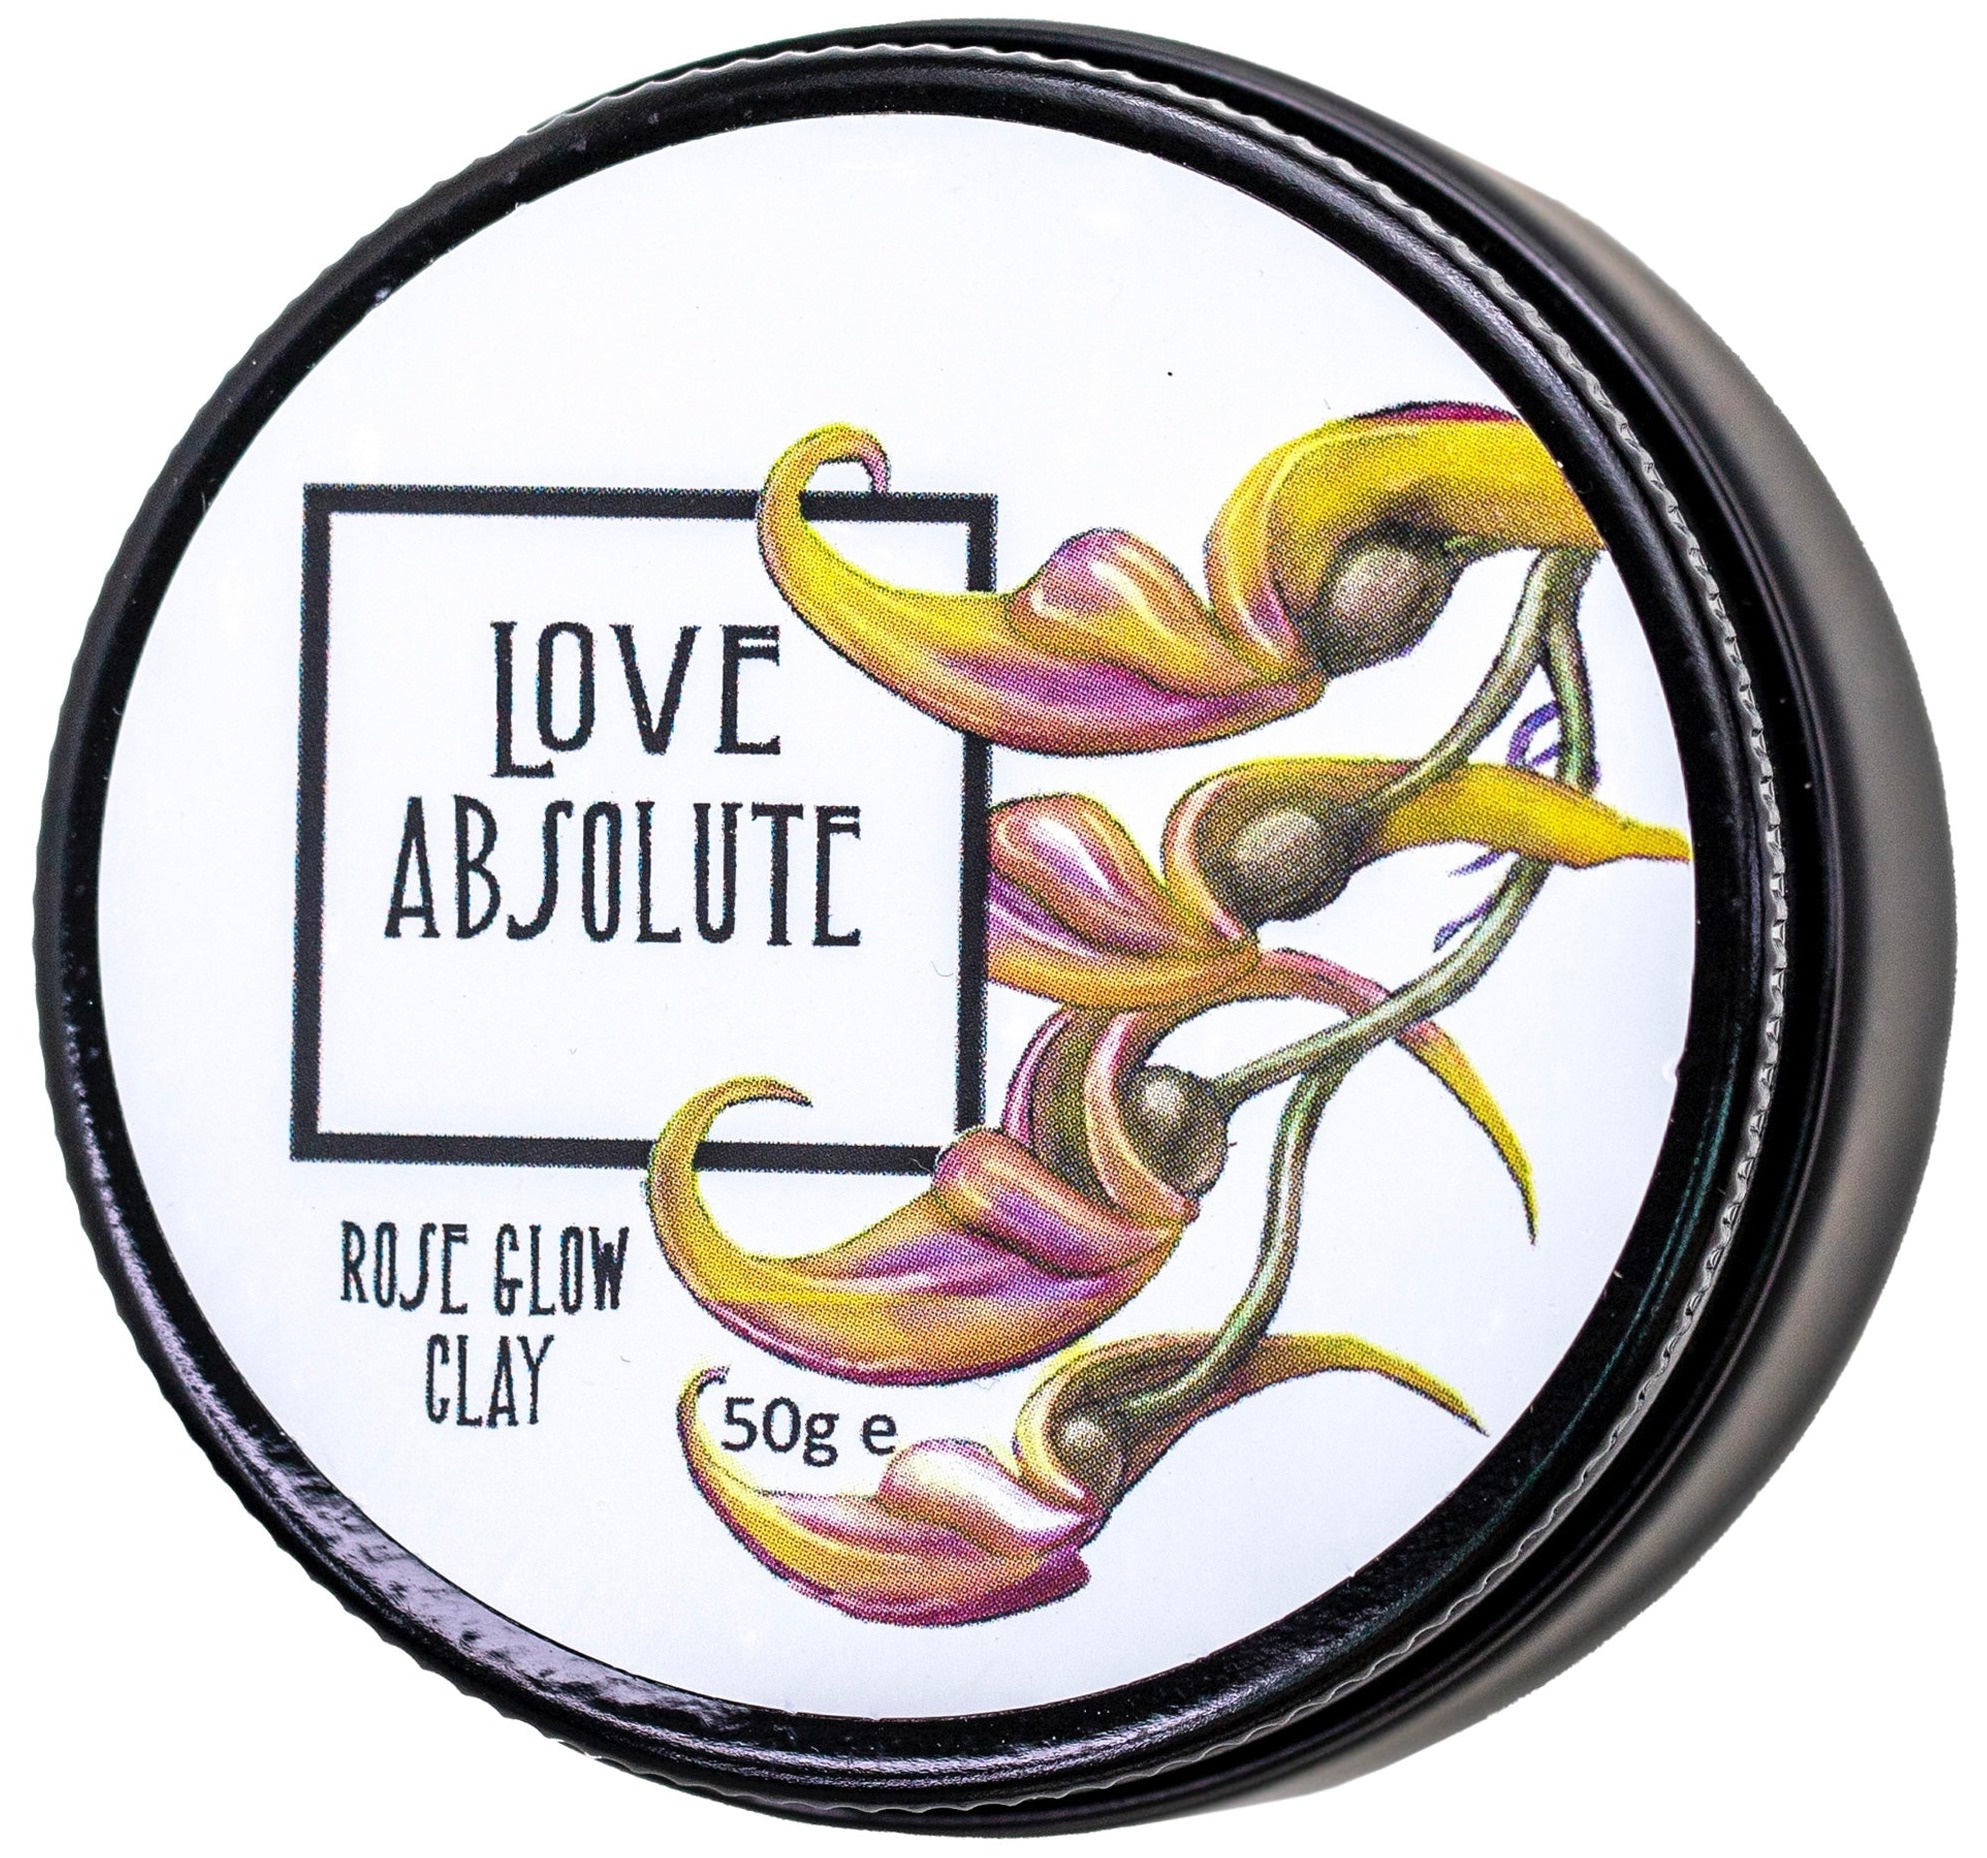 Love Absolute Rose Glow Clay